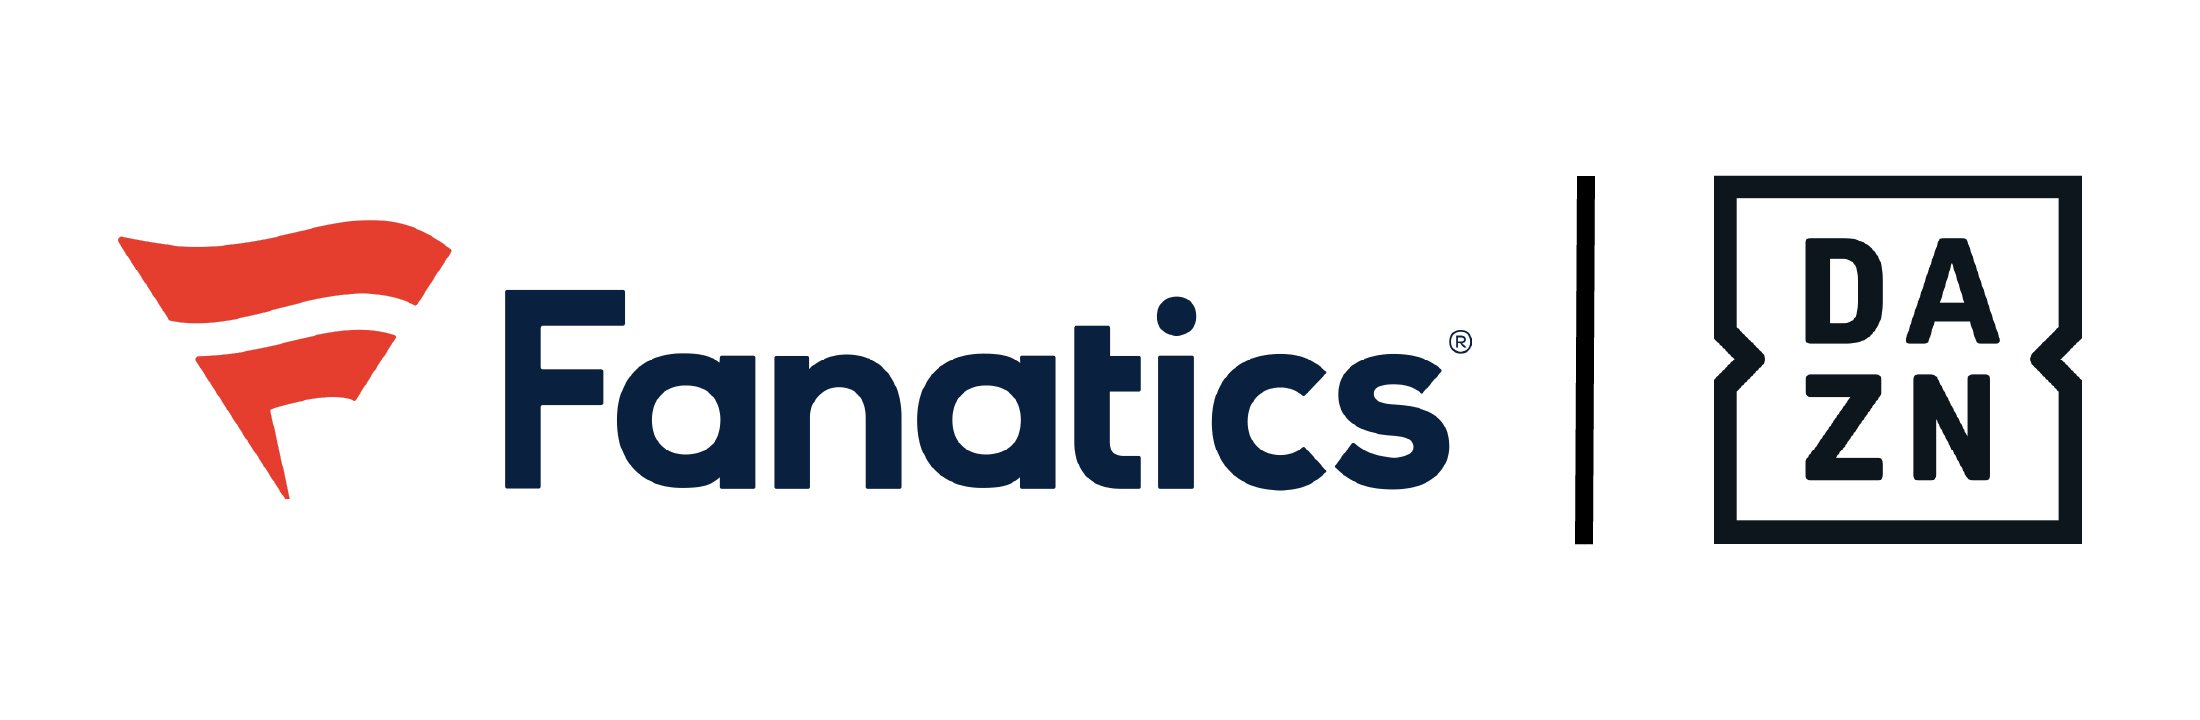 Fanatics and DAZN Partner to Deliver Best-In-Class Worldwide Integrated Sports Fan Experience — Fanatics Inc